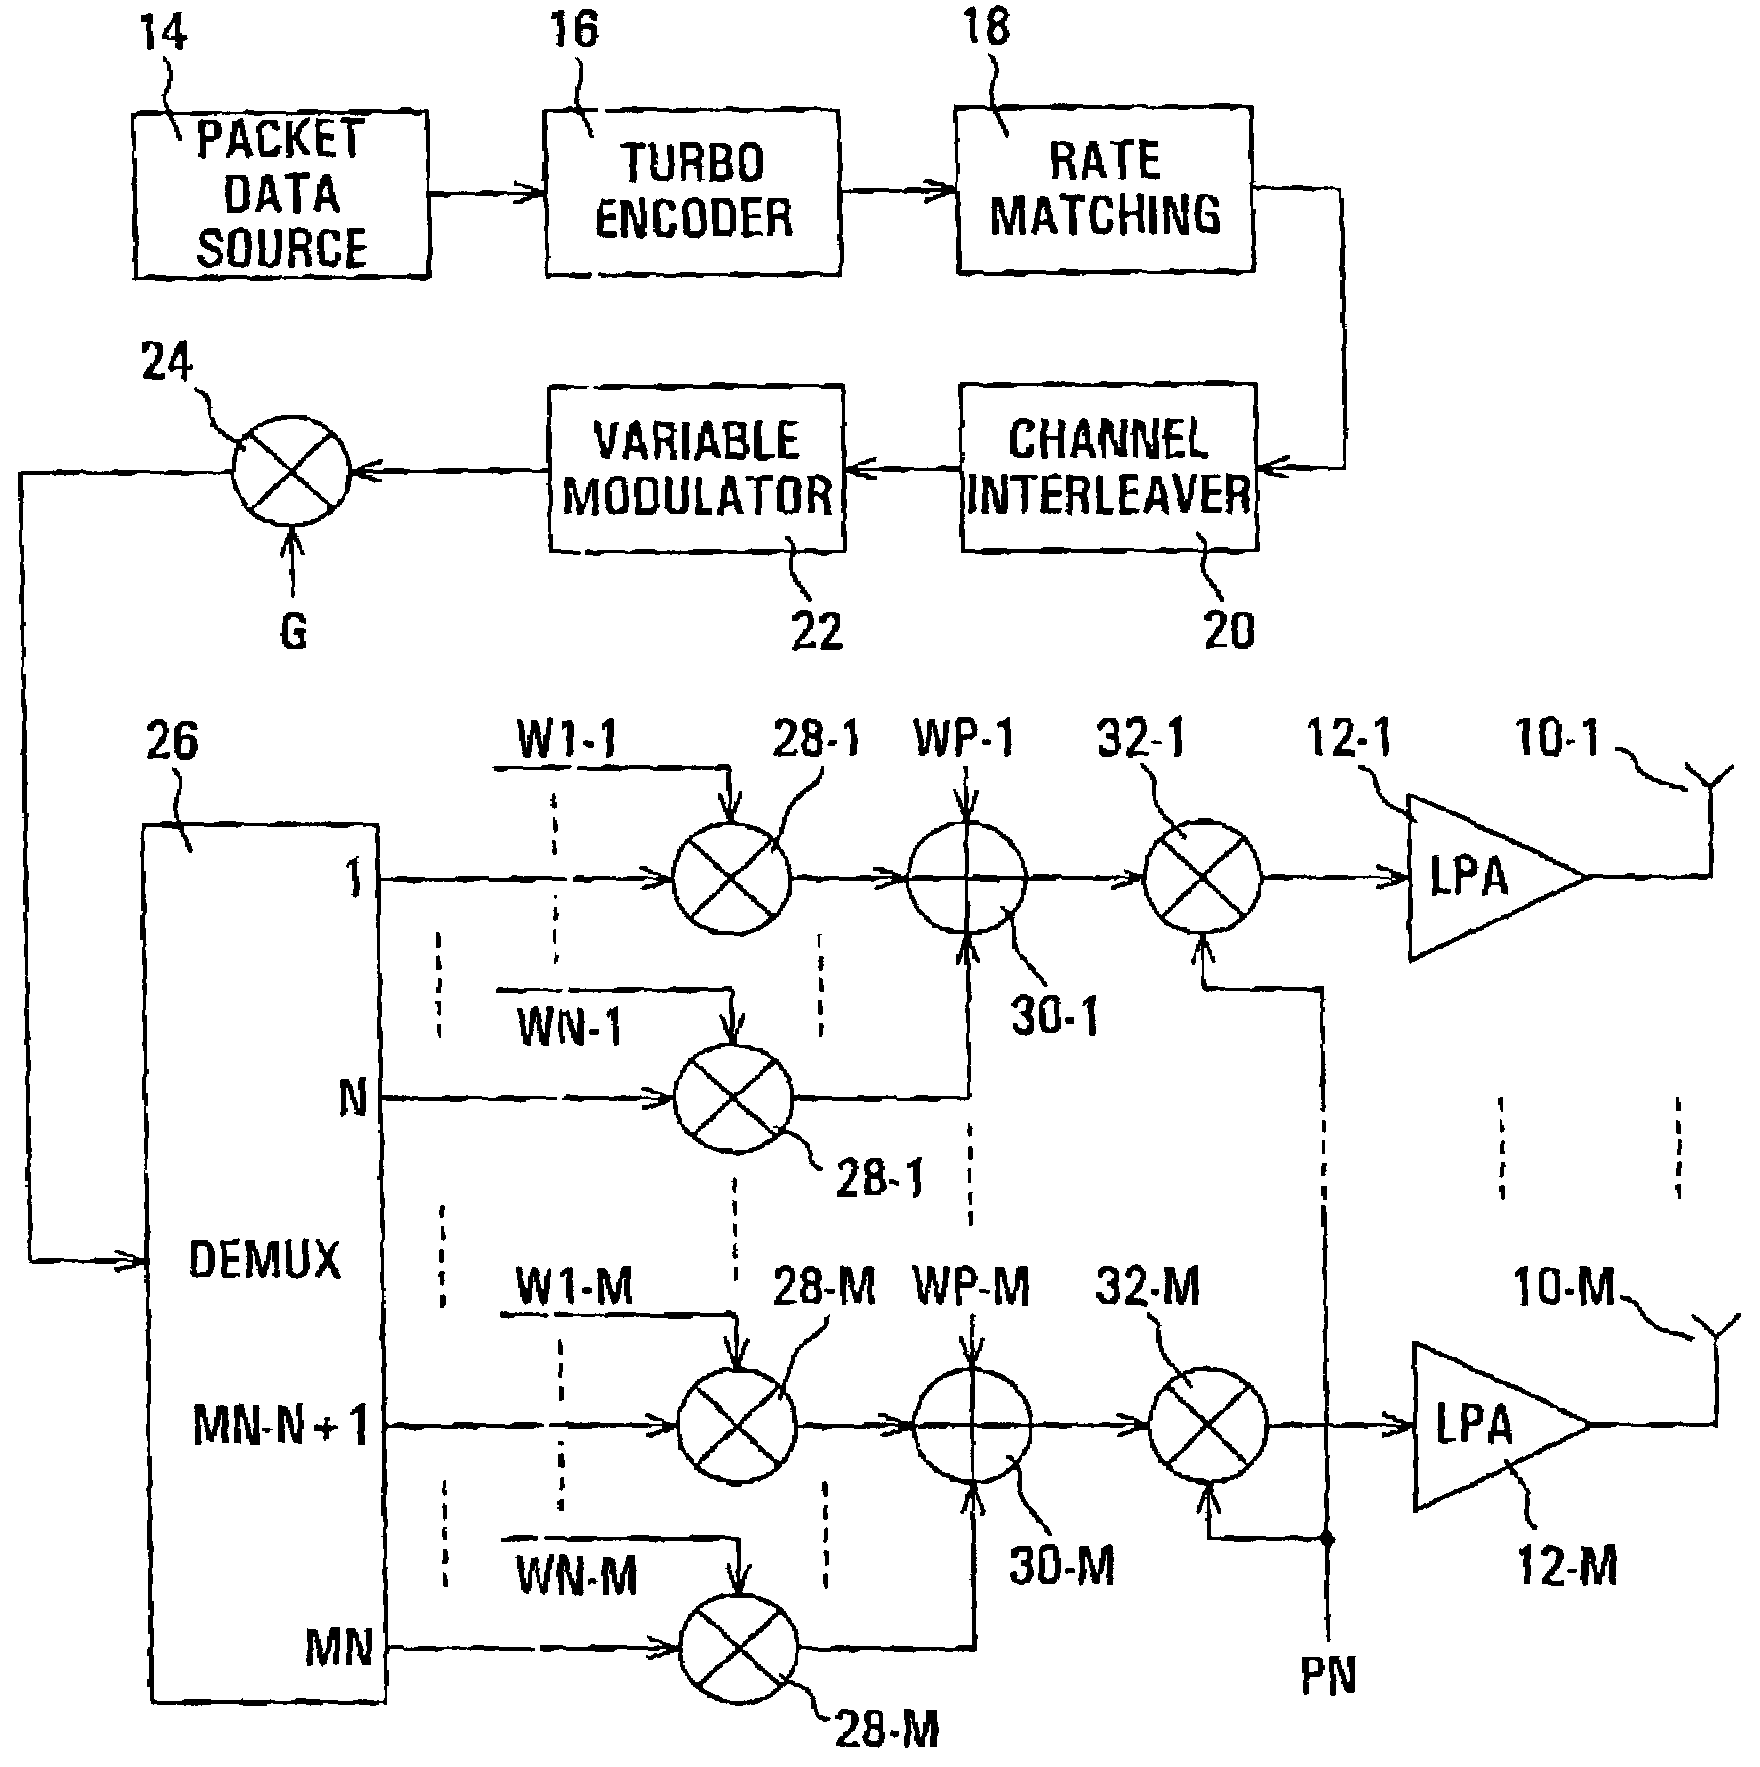 Transmitter for a wireless communications system using multiple codes and multiple antennas